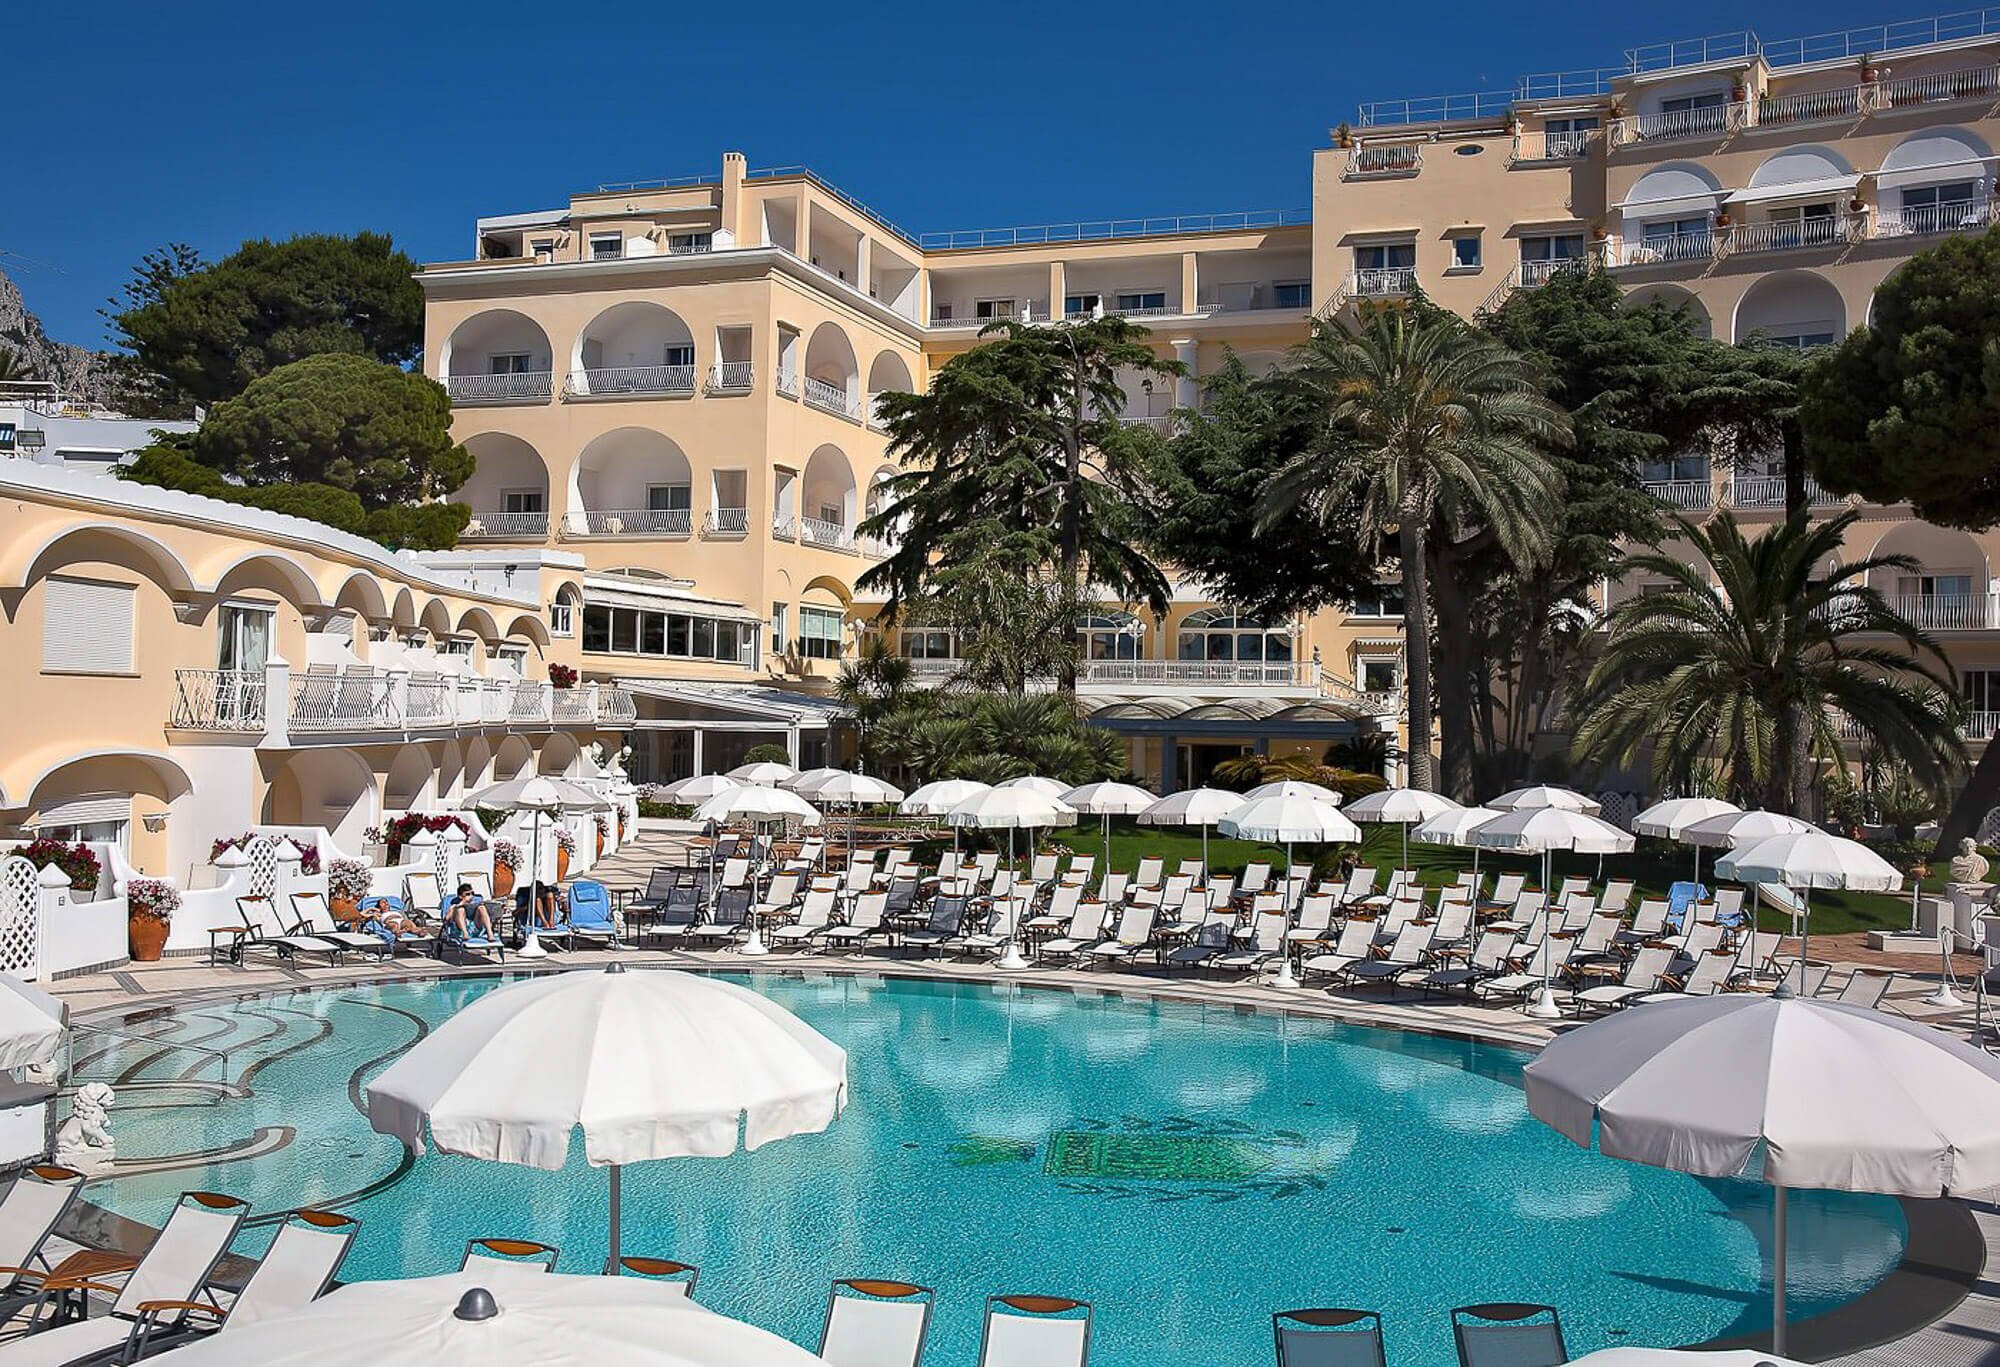 The pool at Grand Hotel Quisisana, one of the best 5 star hotels in Capri